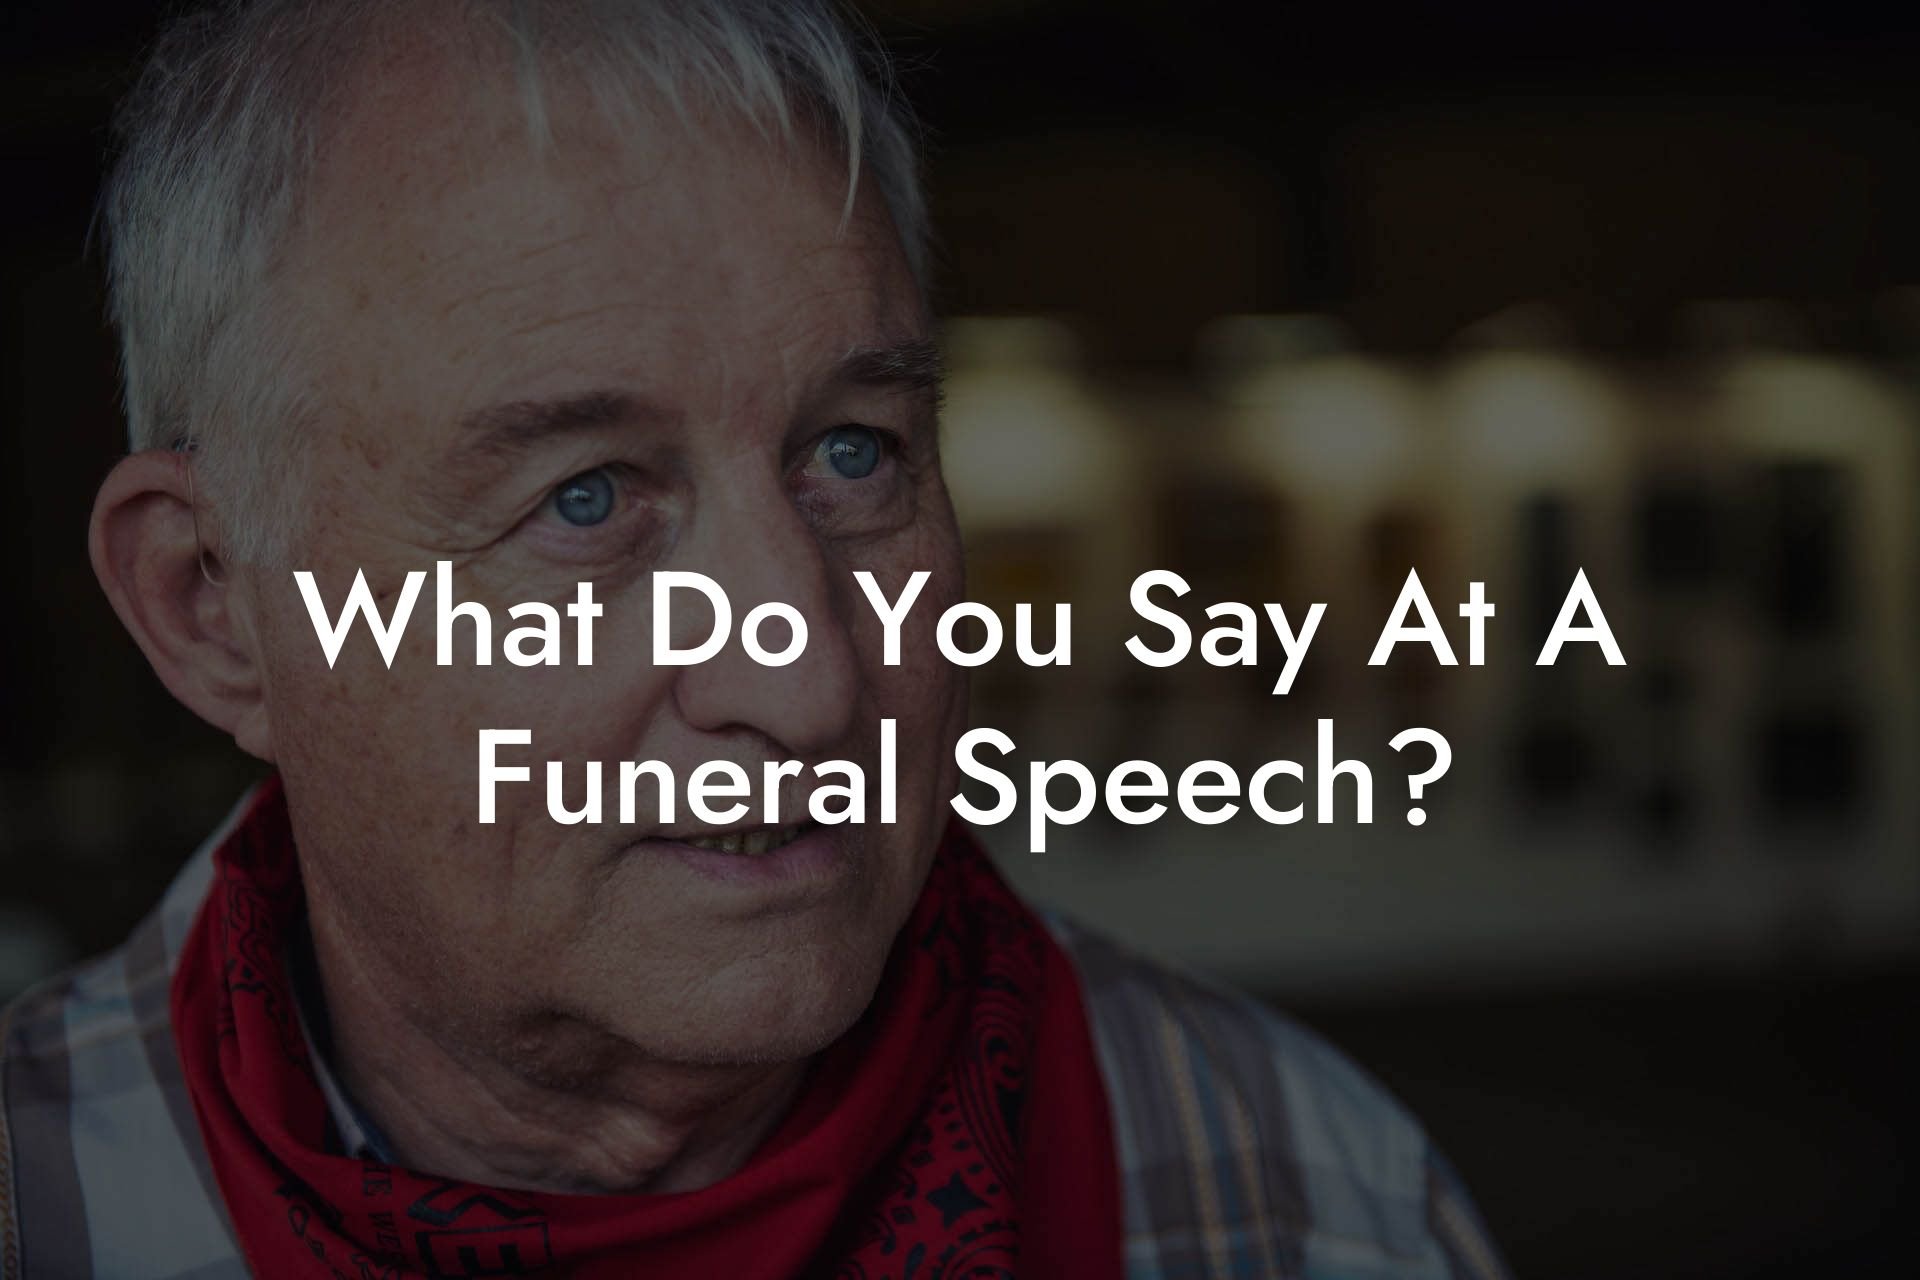 What Do You Say At A Funeral Speech?